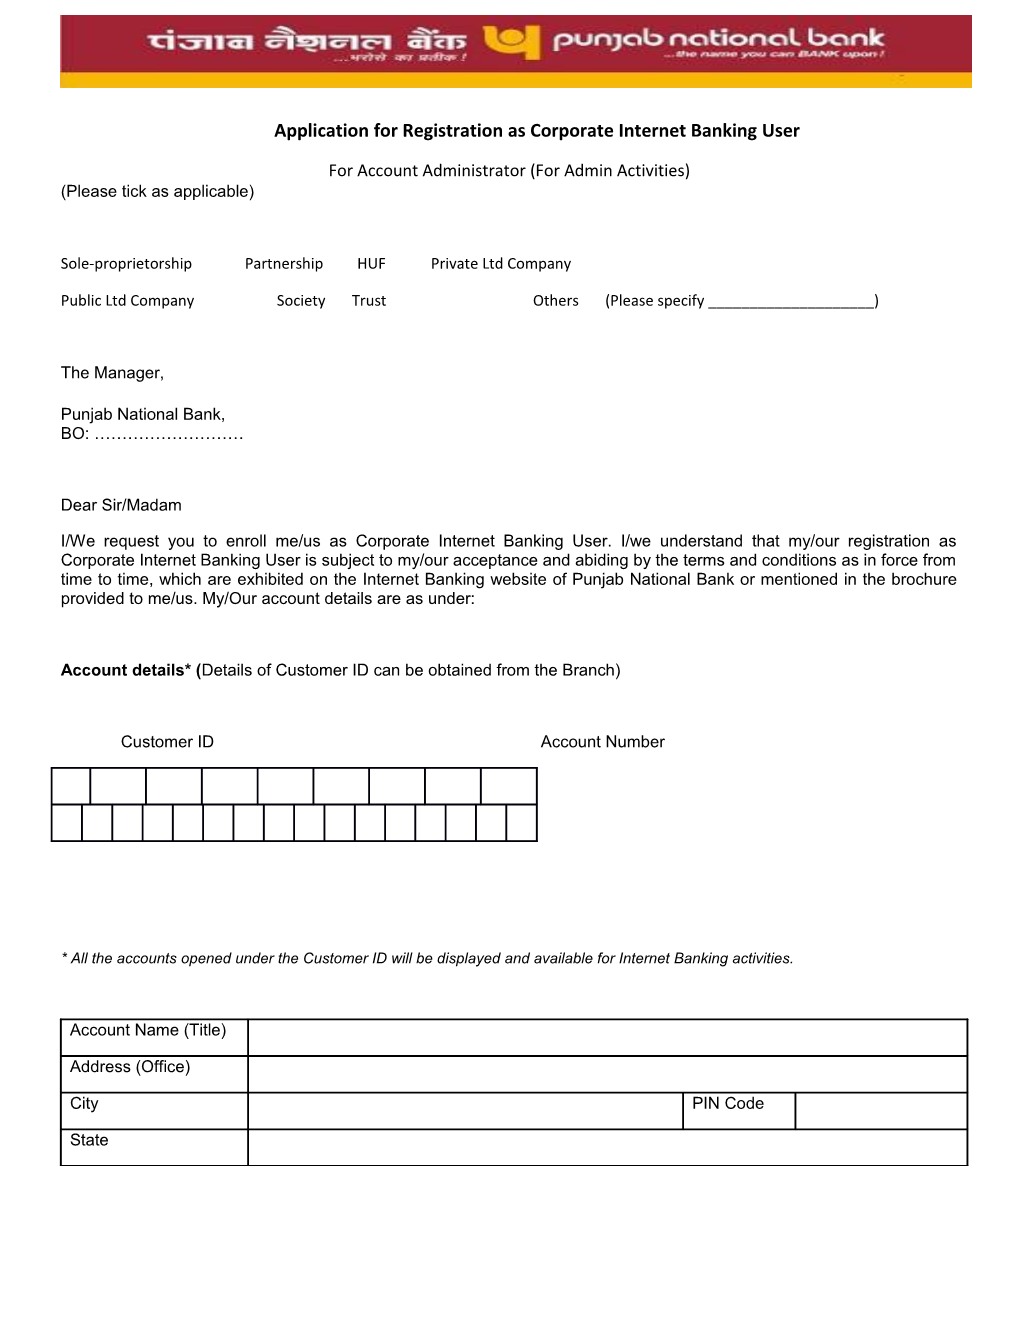 Application for Registration As Corporate Internet Banking User